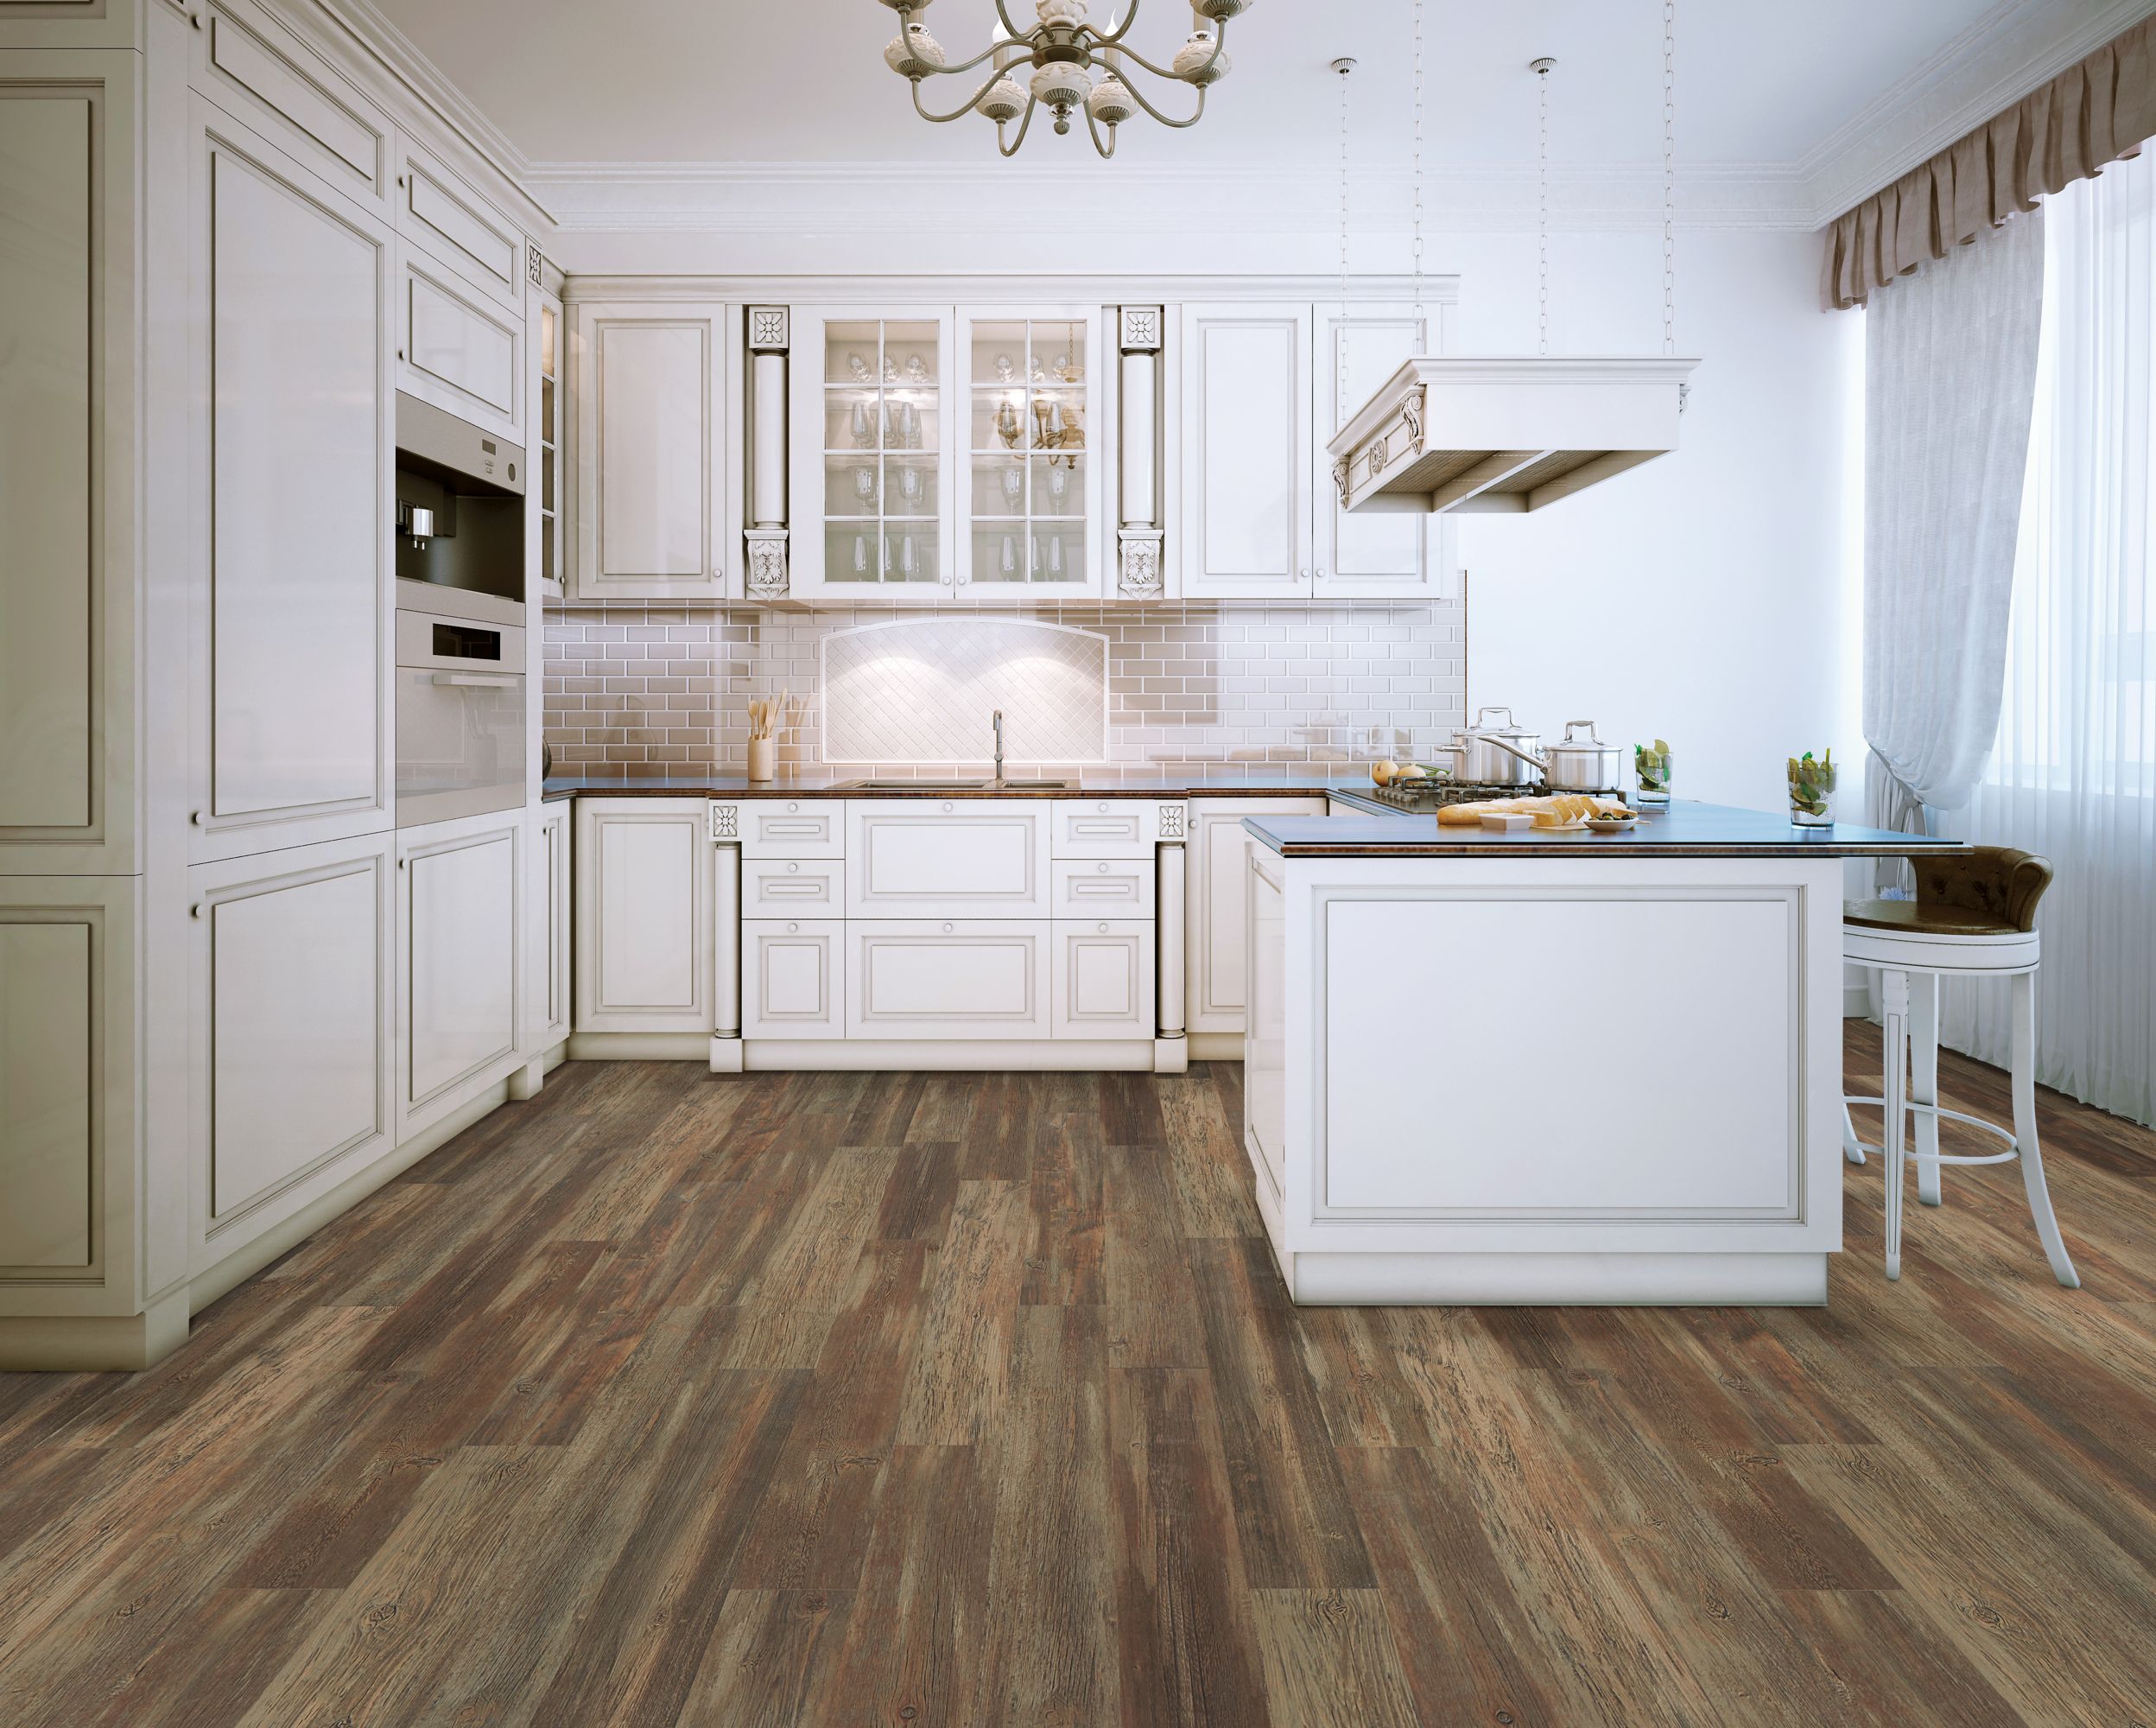 Brown and white traditional kitchen with hardwood floors